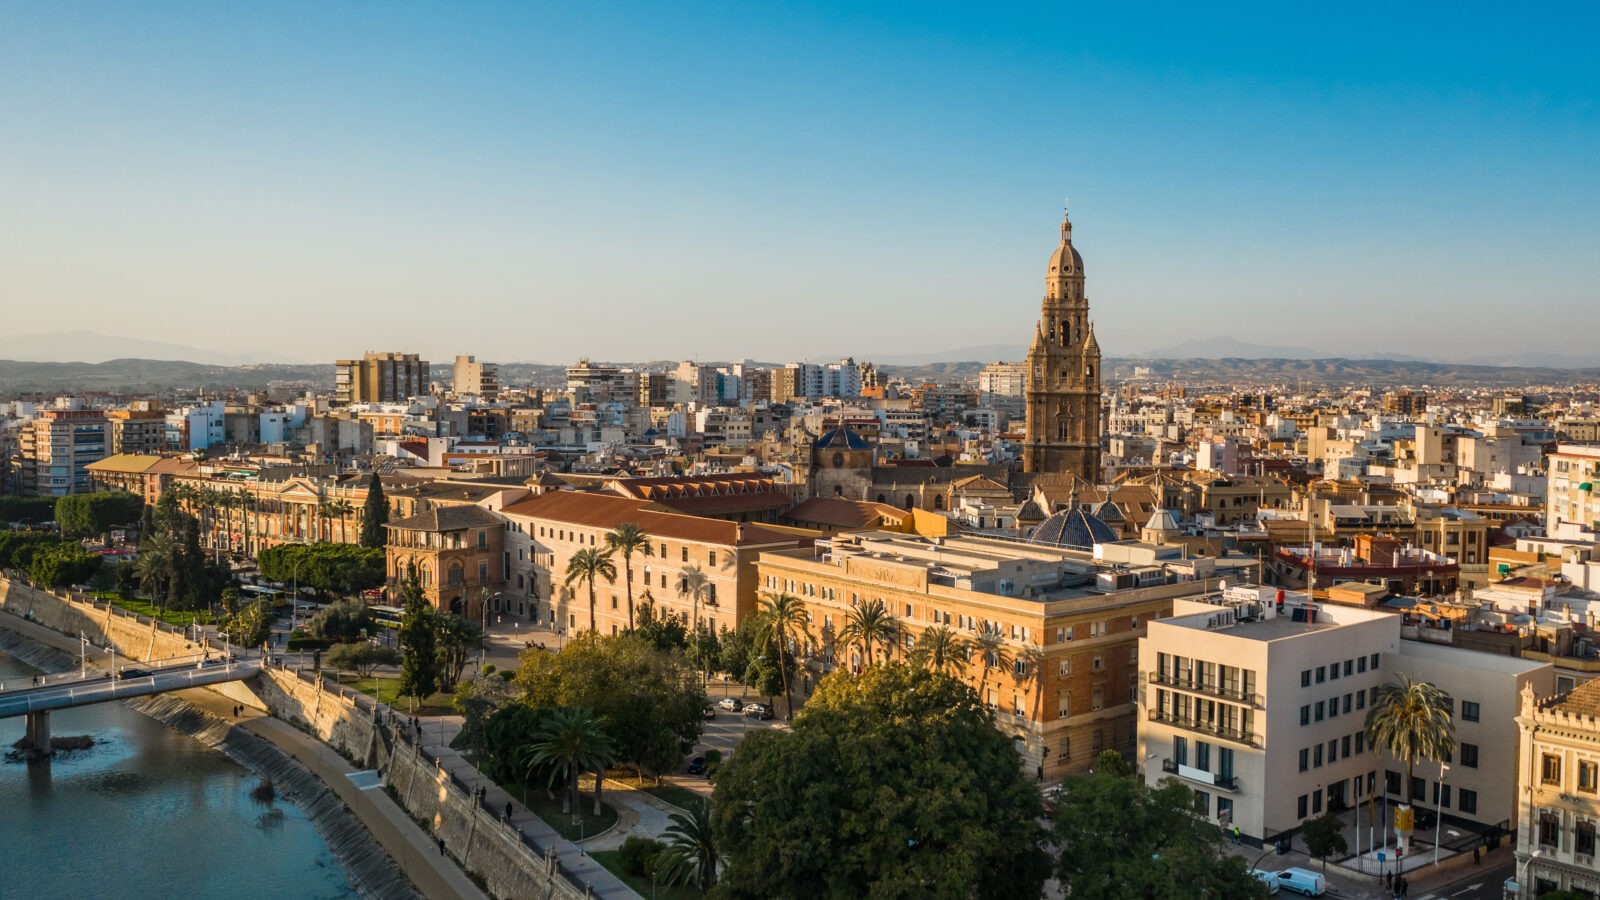 Cityscape of Murcia before sunset. Aerial view